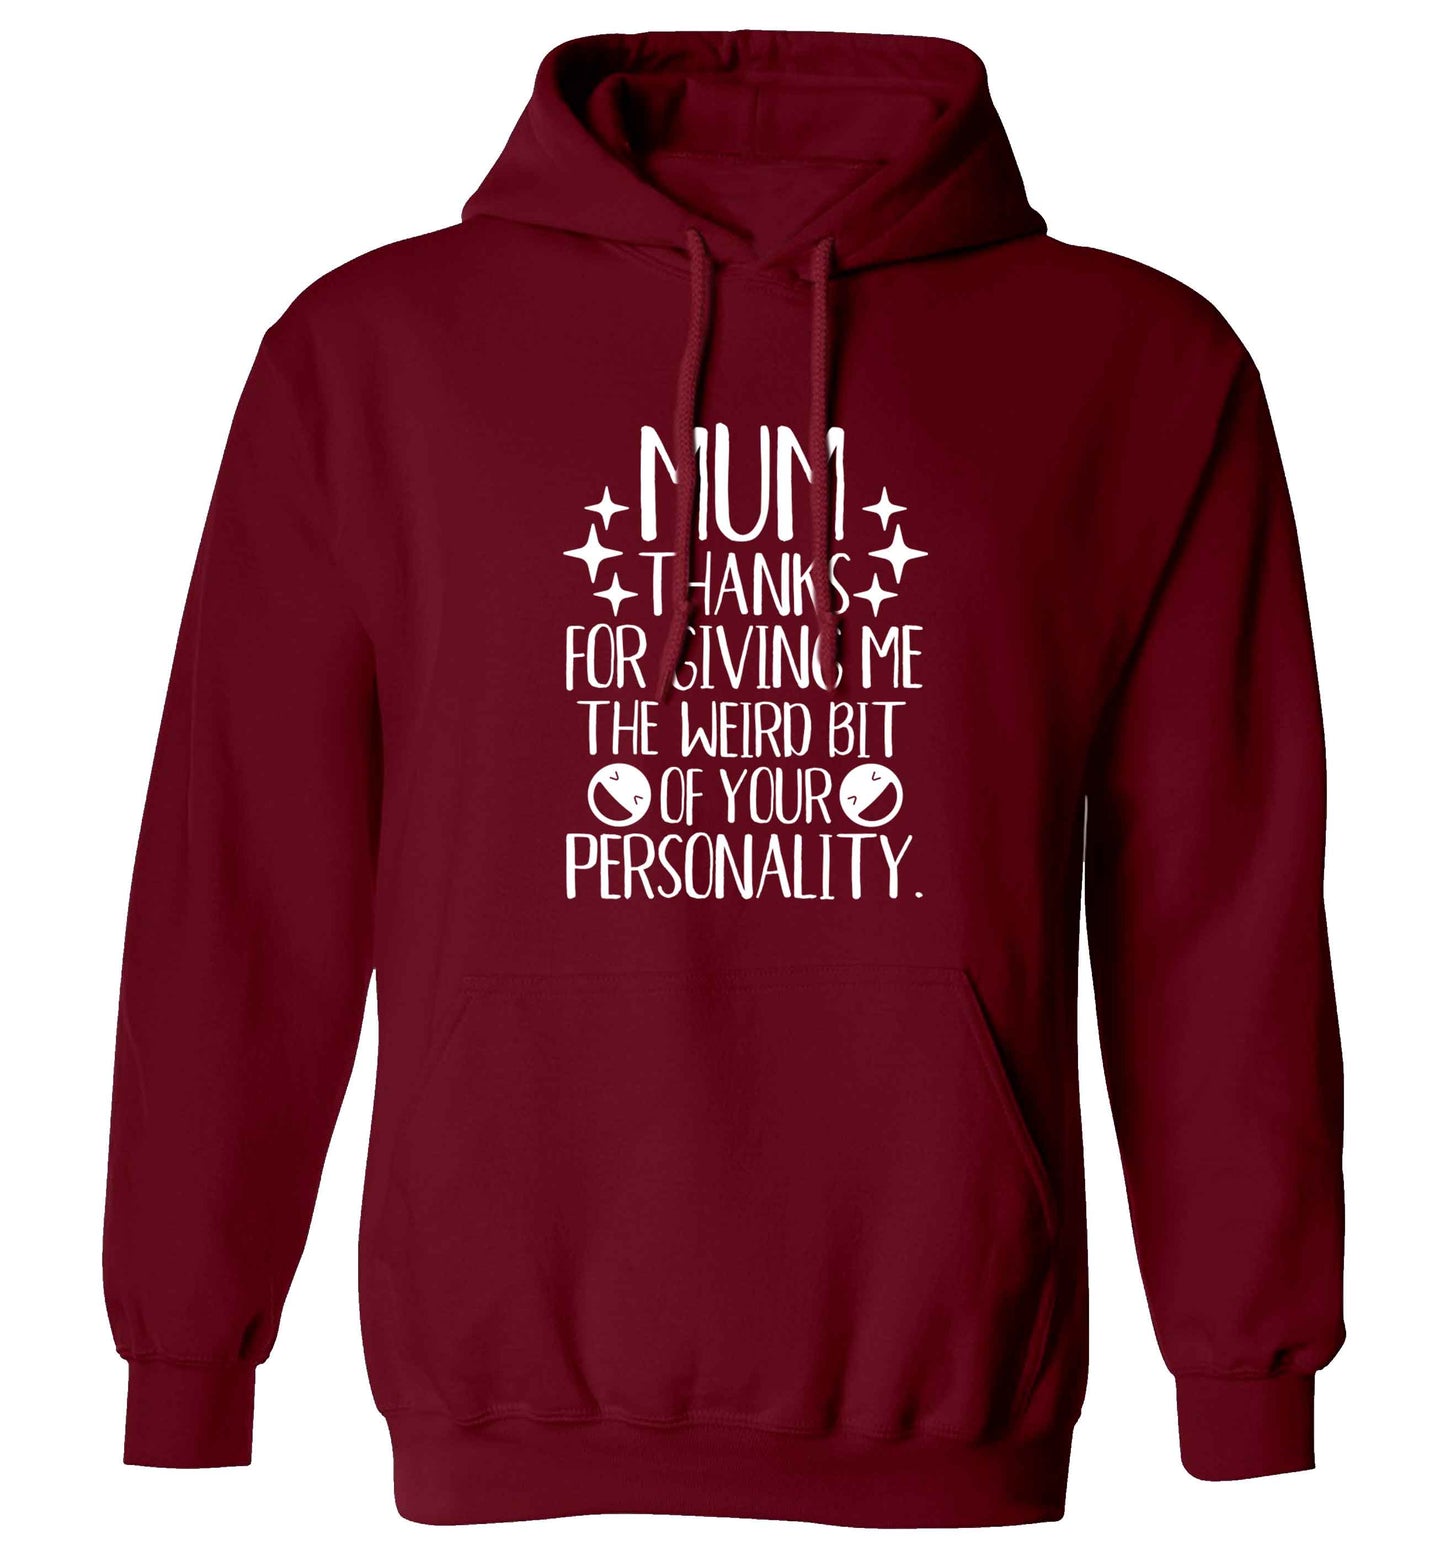 Mum thanks for giving me the weird bit of your personality adults unisex maroon hoodie 2XL